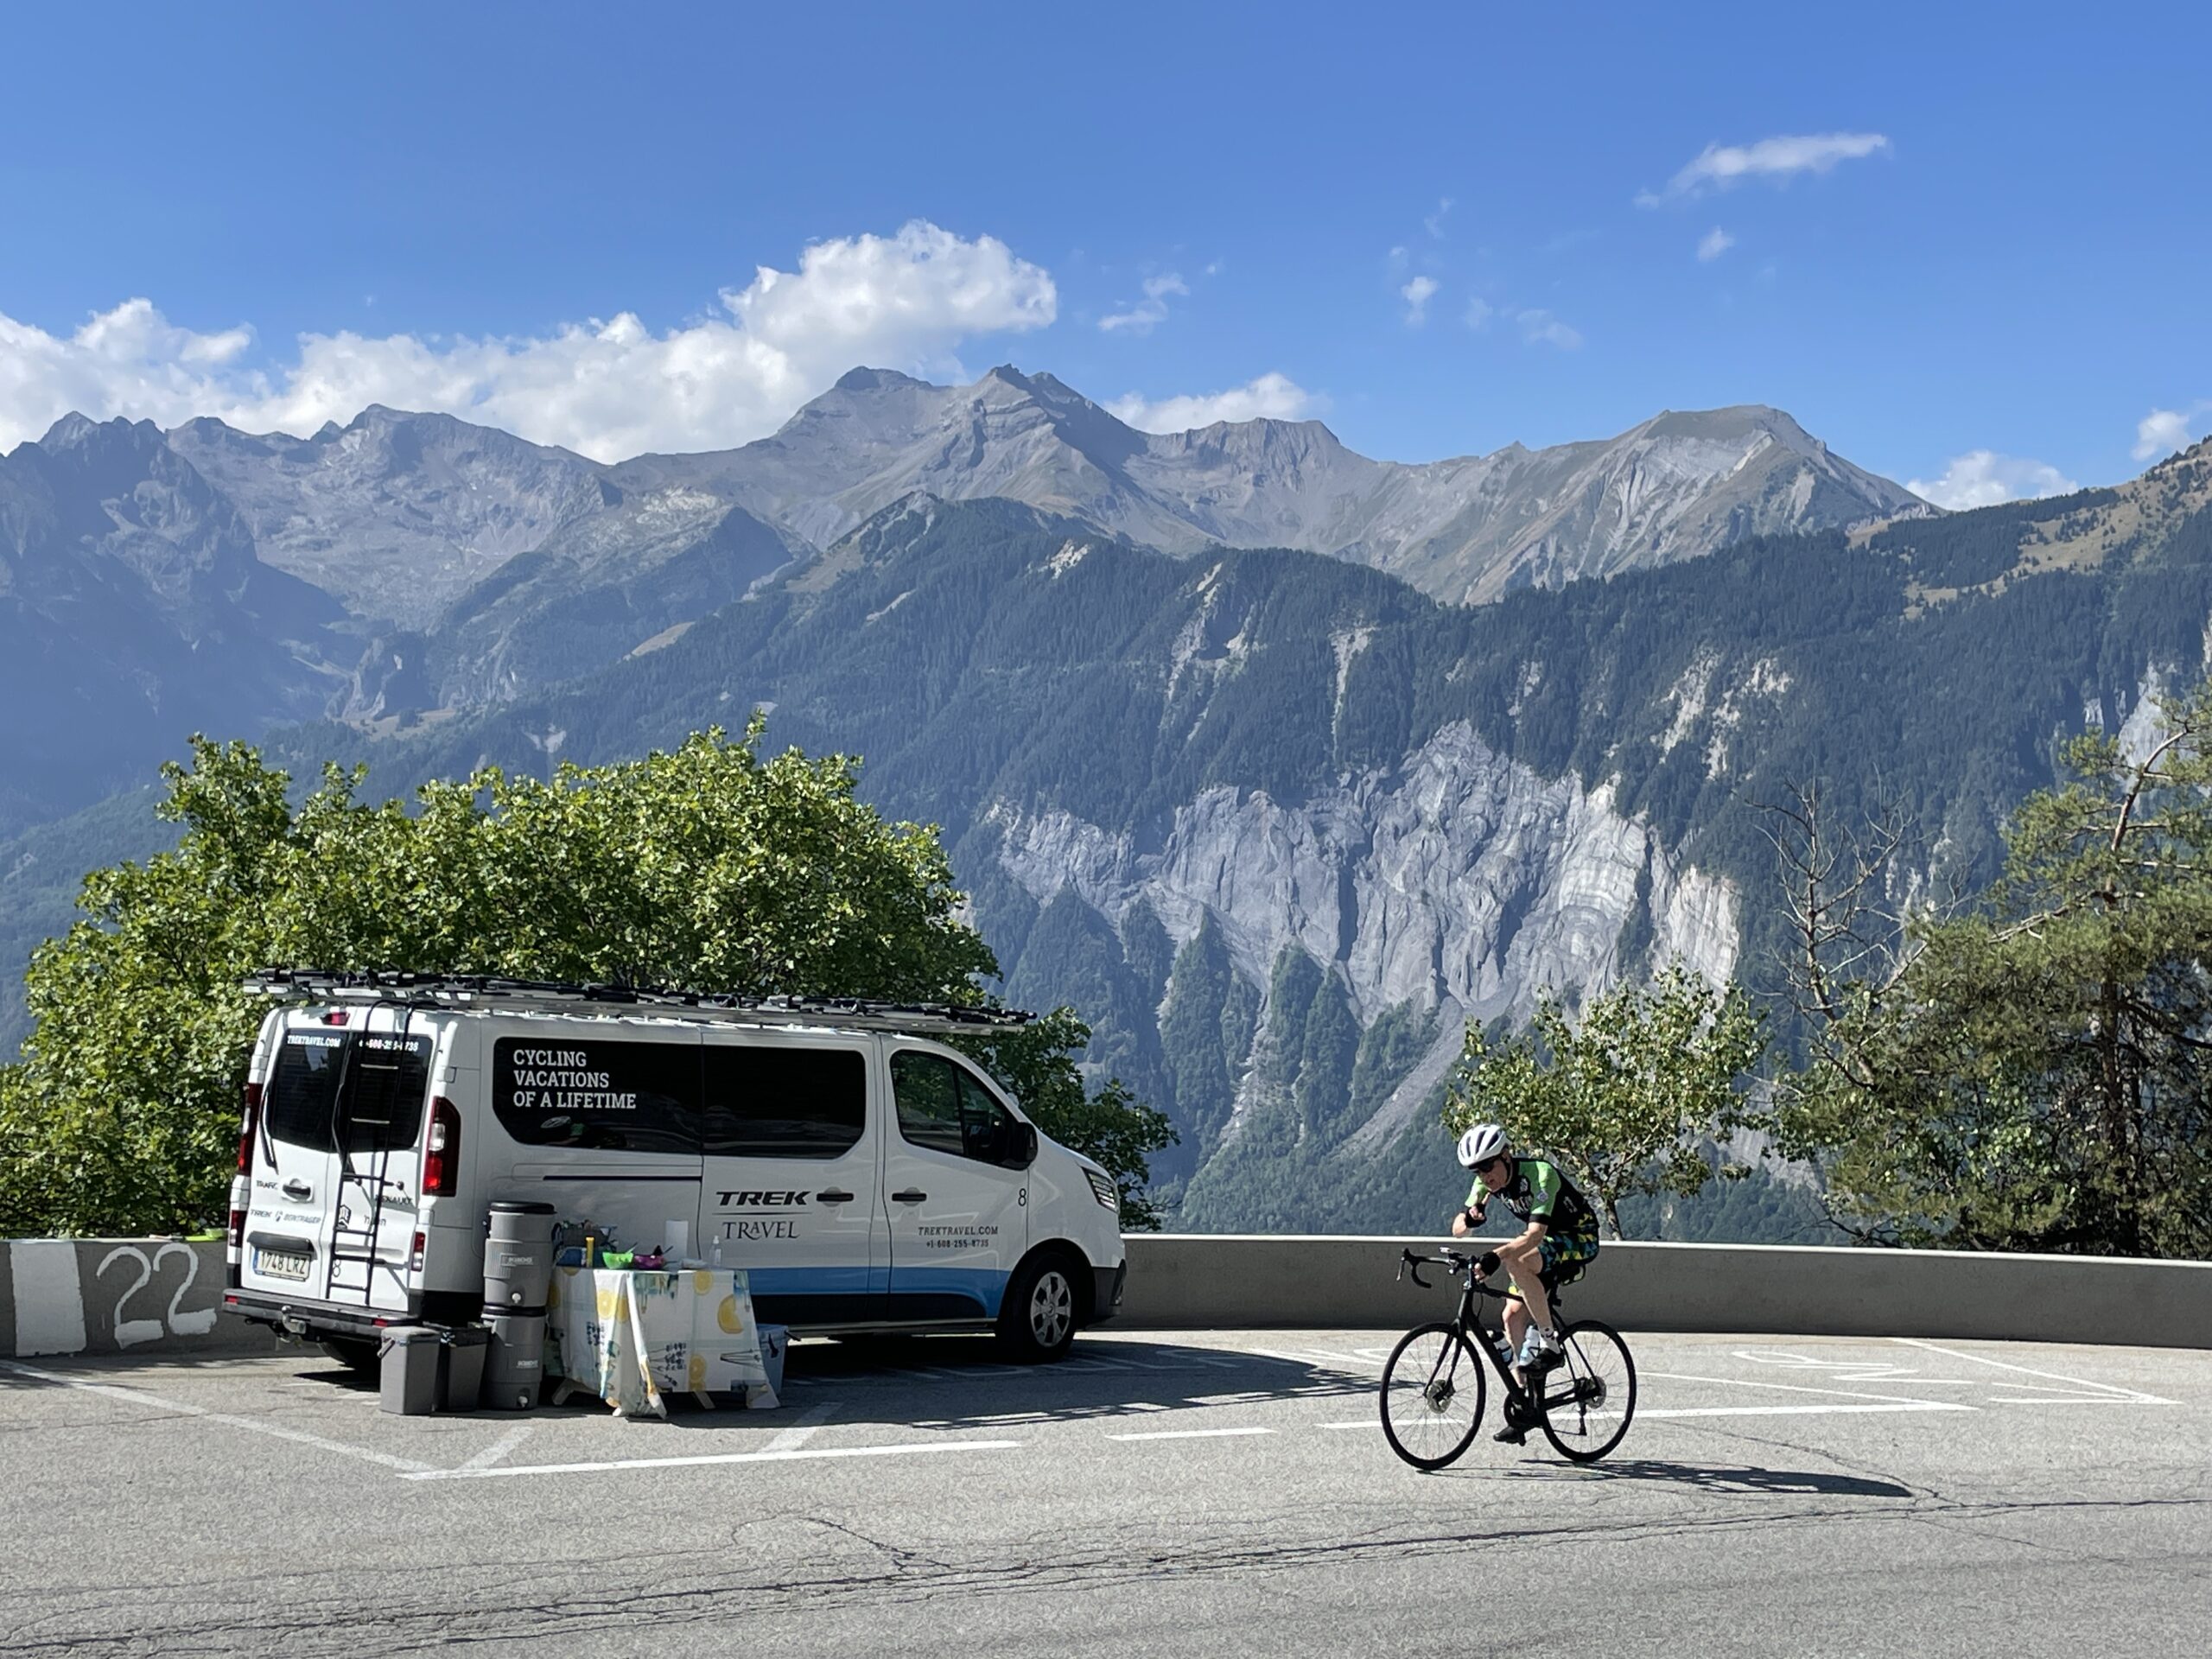 A person riding up to Alpe d'Huez next to the TT van with mountains in the background